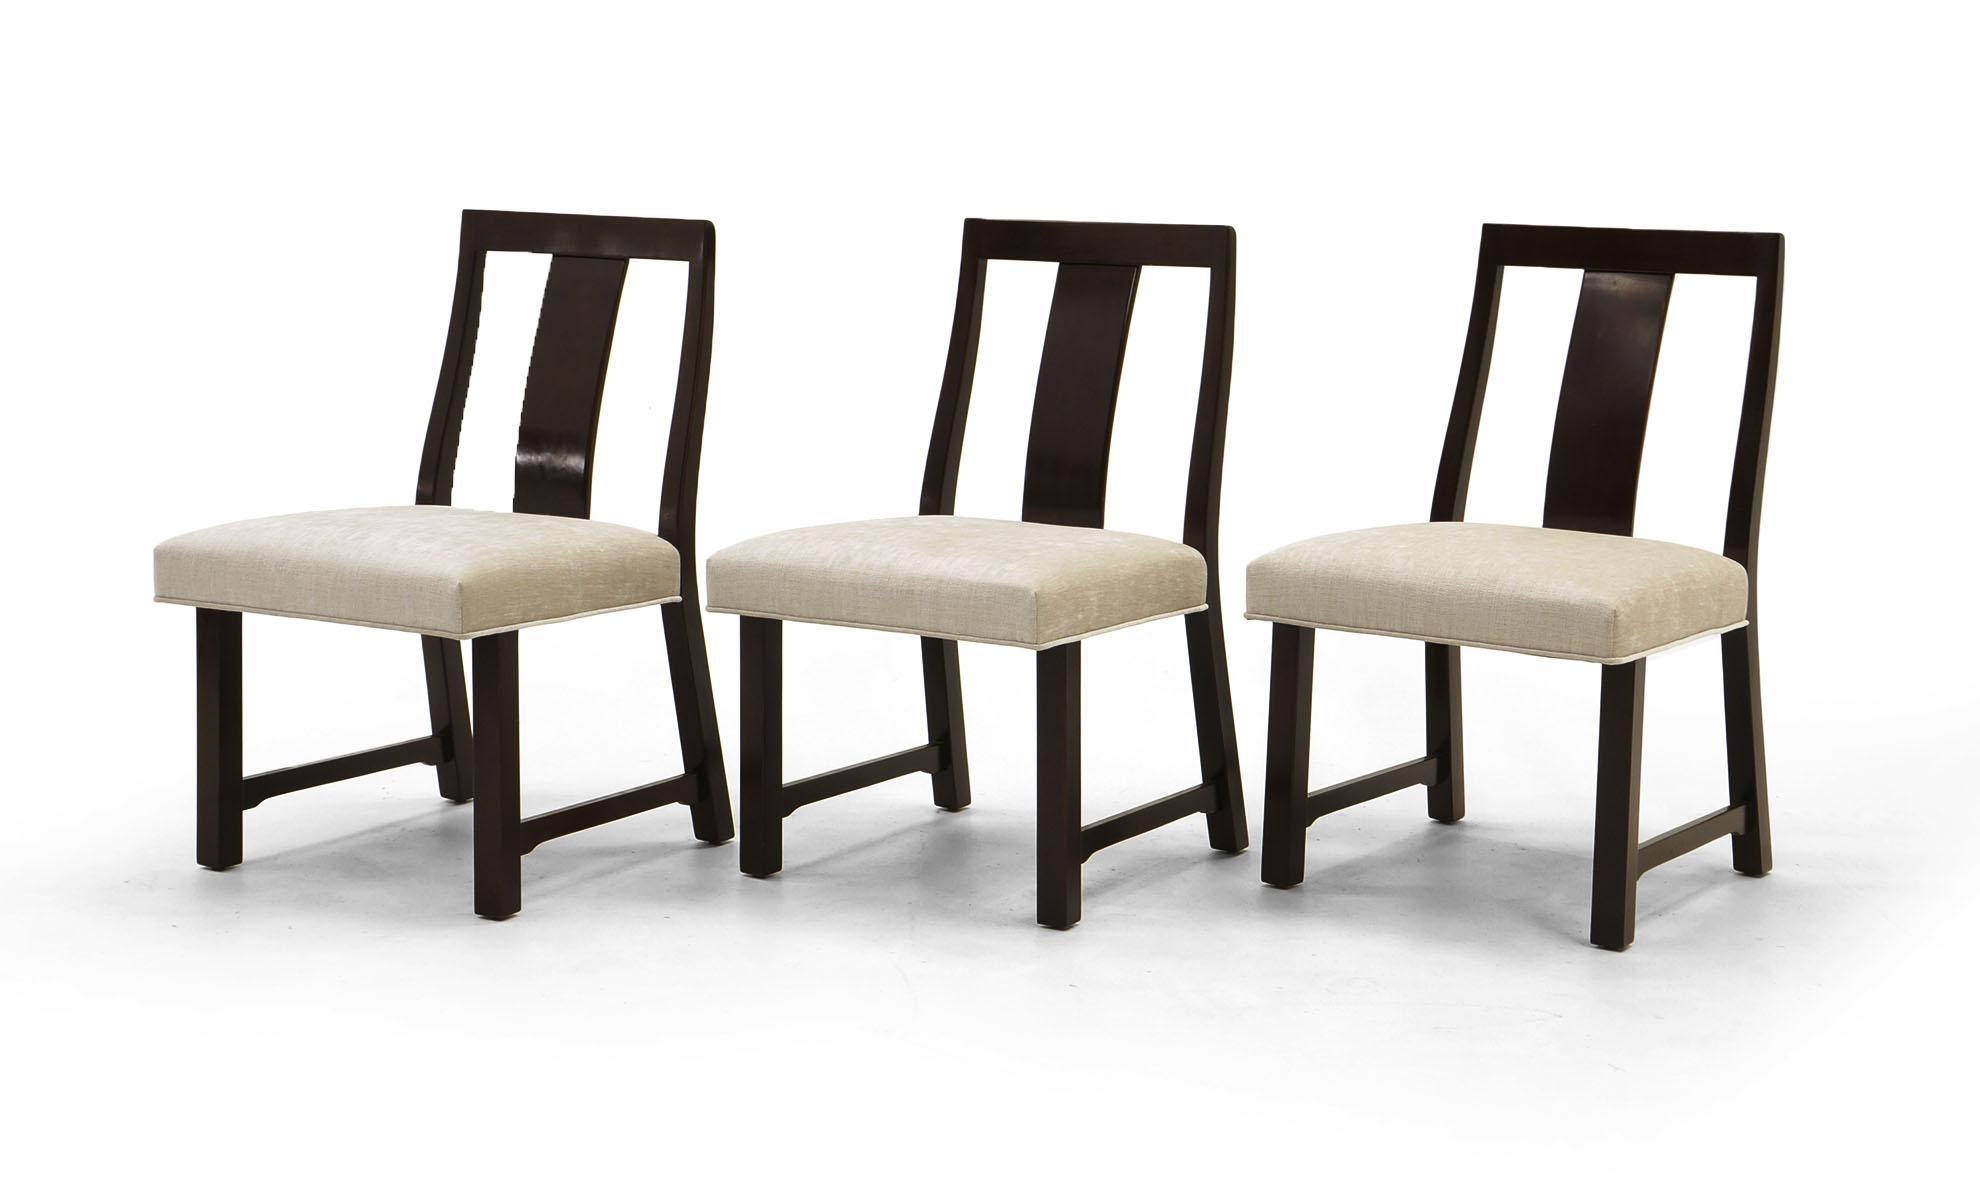 Set of eight dining chairs designed by Edward Wormley for Dunbar. Dark stained African mahogany with original finish. Expertly reupholstered using luxurious Knoll Chalk fabric, cream / ivory color. A stunning set. Two arm chairs and six side